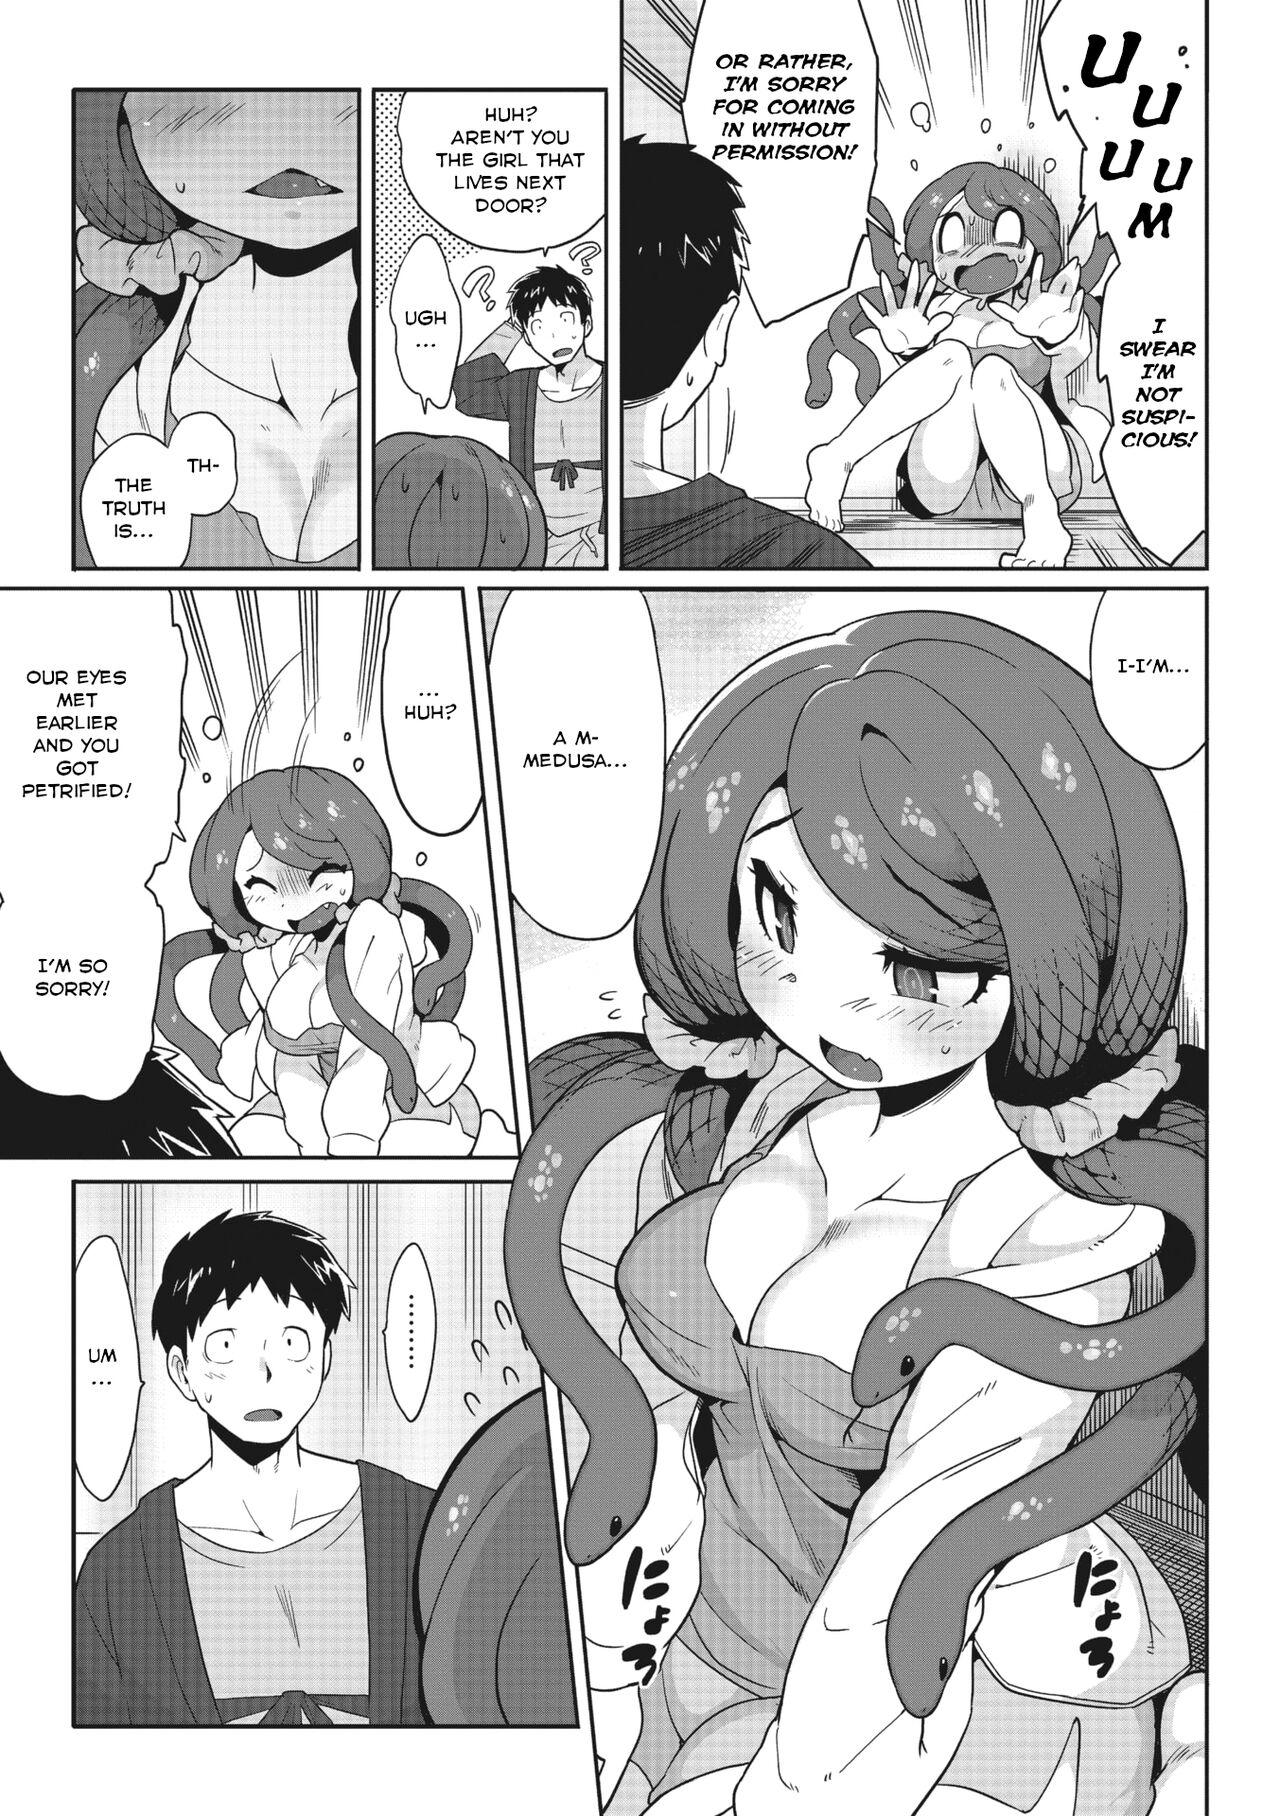 Sexteen Mitsumenaide, dakishimete. | Don't look, just hold me. Sexy - Page 5